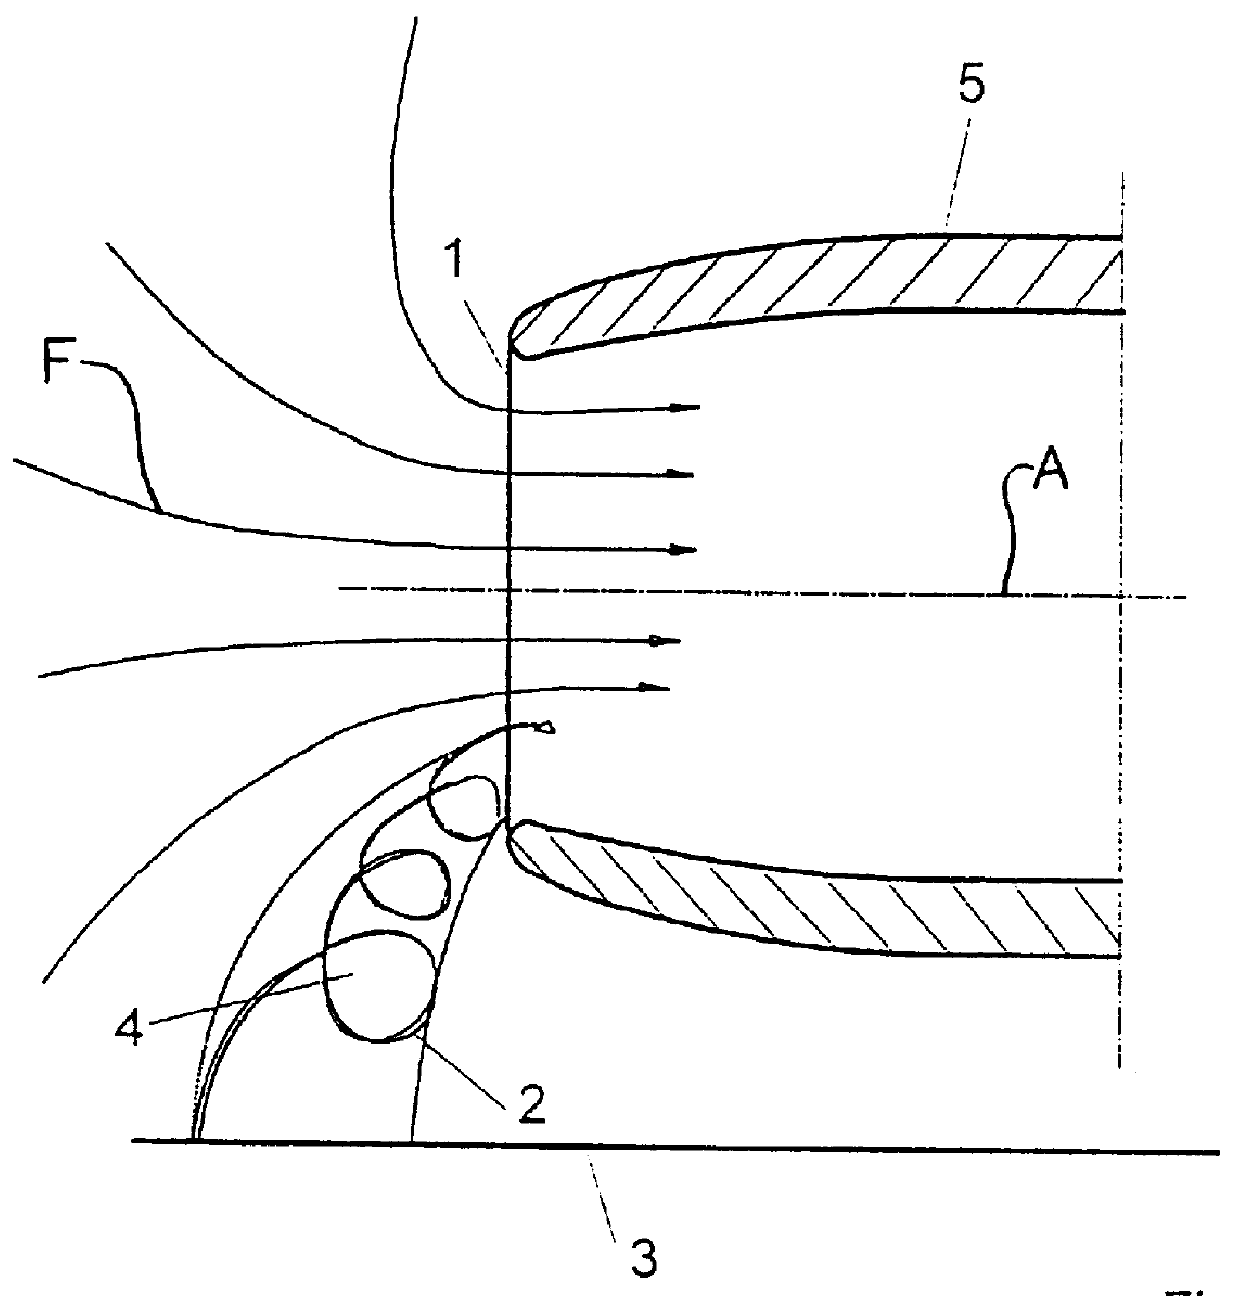 Method and apparatus for stabilizing an intake air flow of a ground-based turbine engine